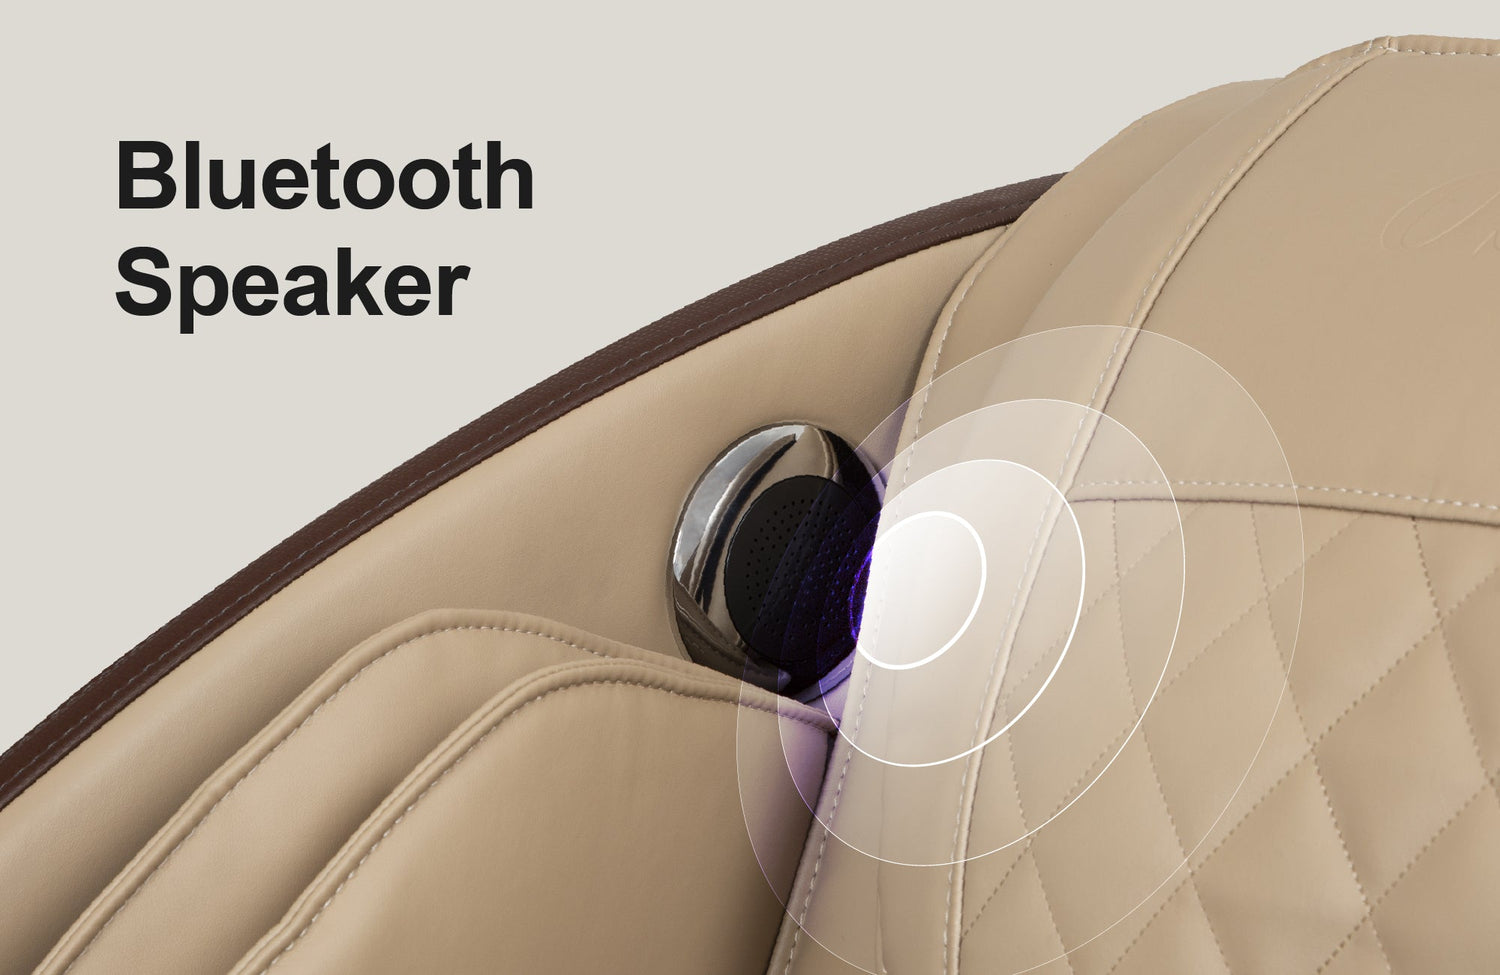 The Osaki Champ massage chair includes Bluetooth technology, enabling users to enjoy music through high-quality speakers located in the headrest. 